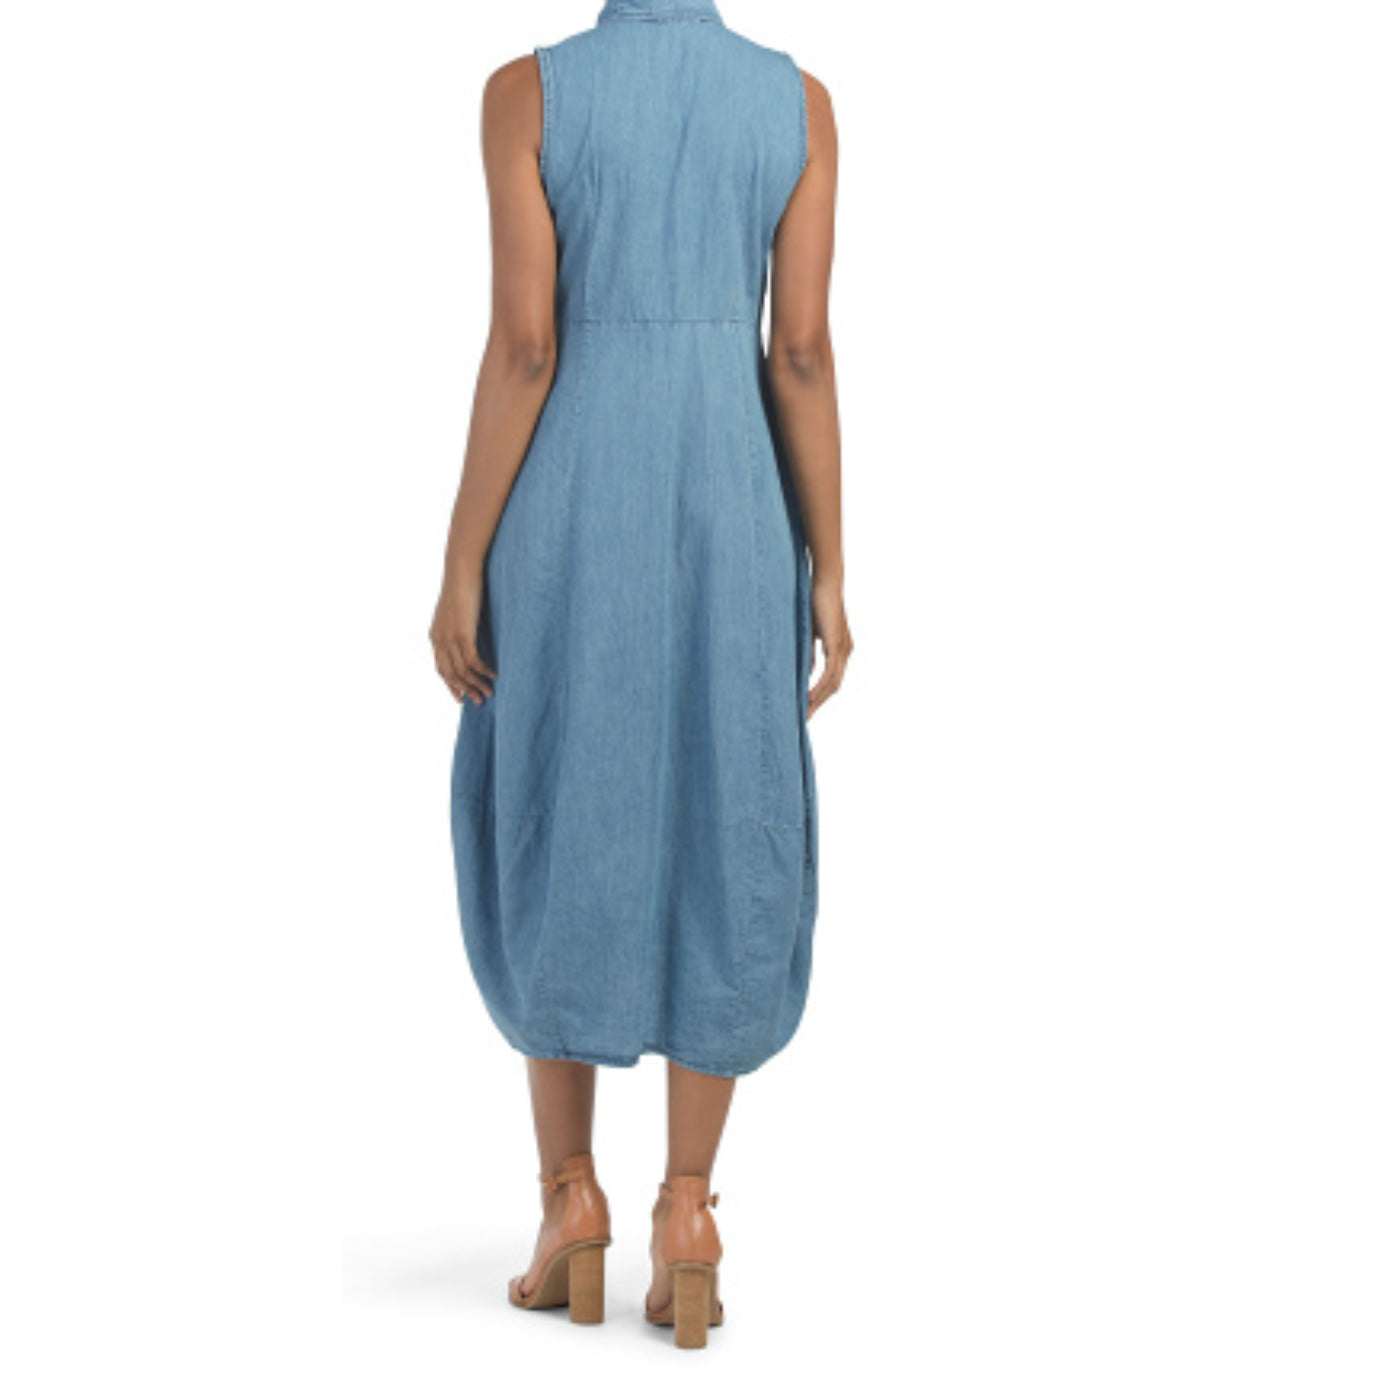 ANGELA Made In Italy Button Front Denim Midi Dress